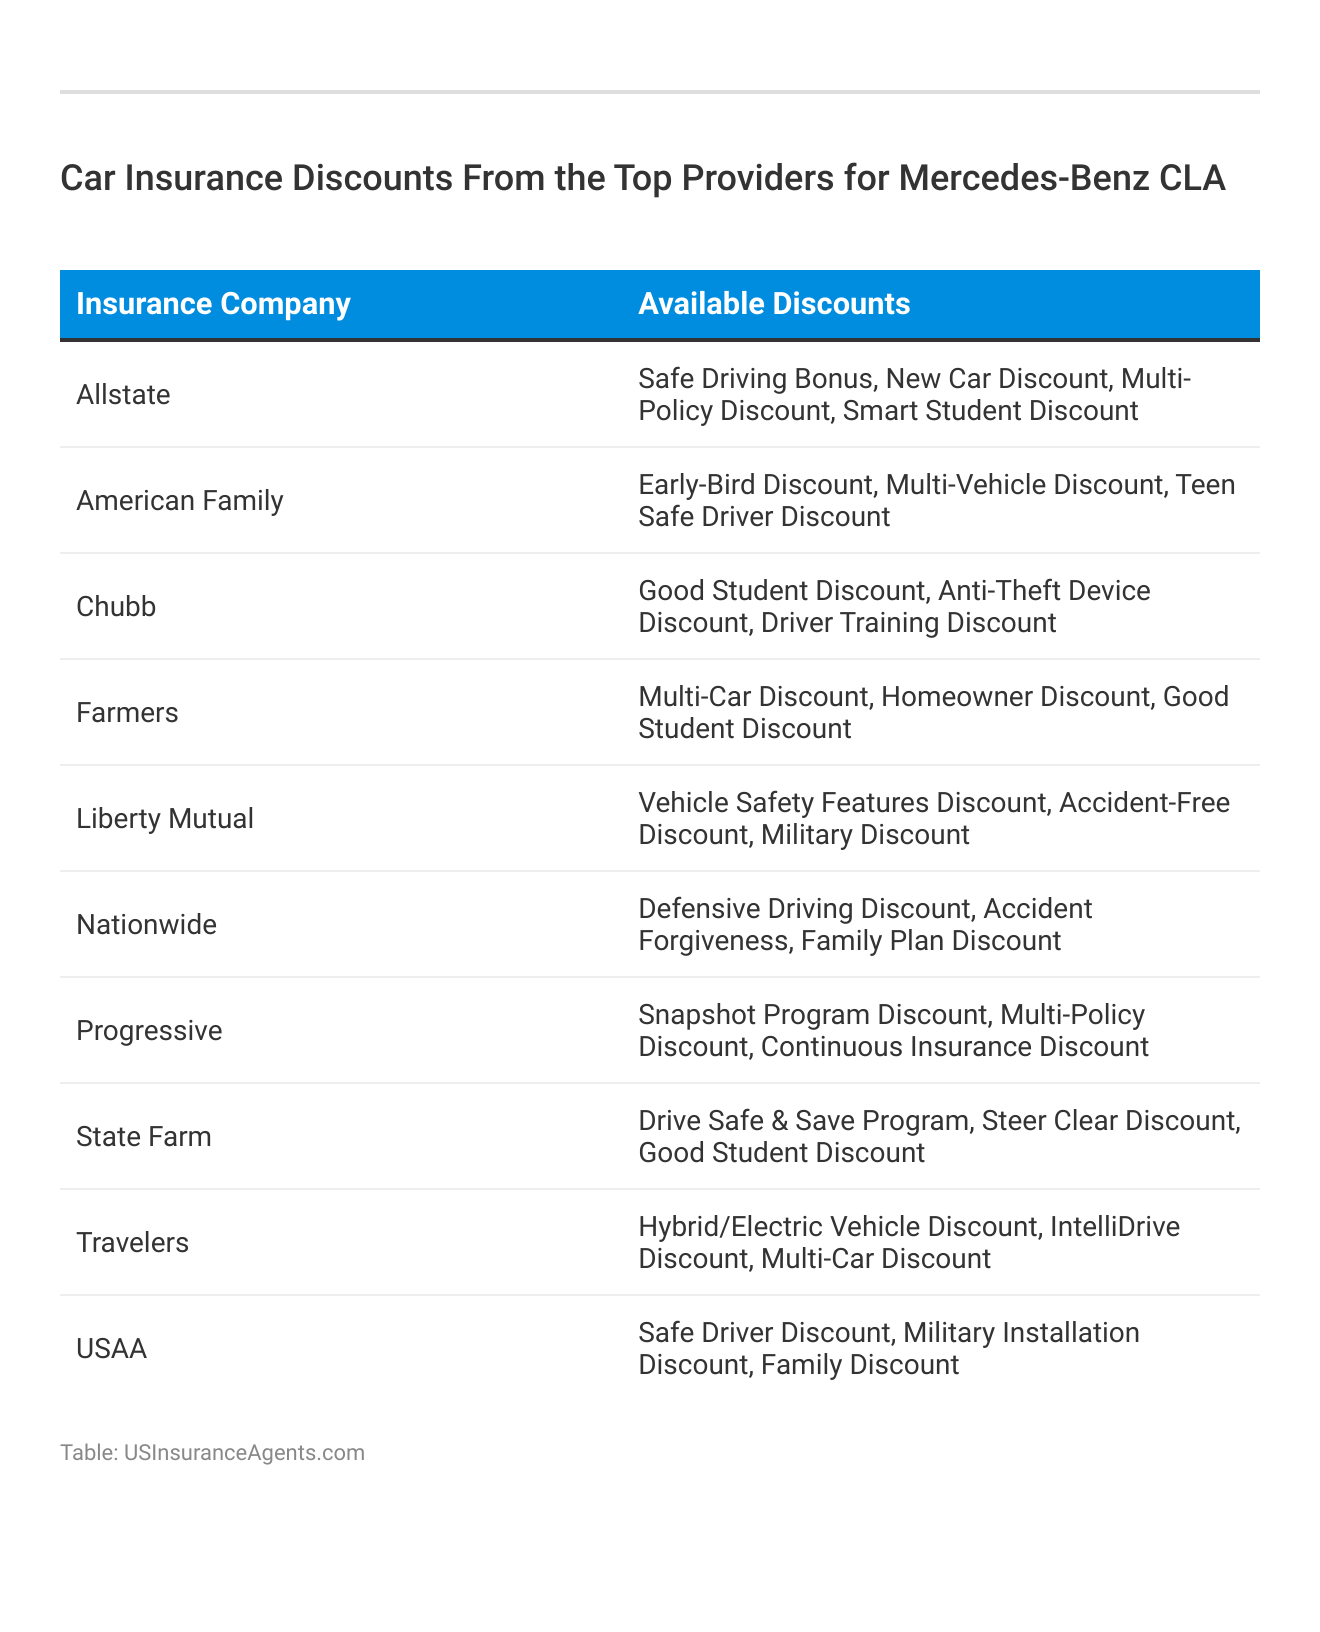 <h3>Car Insurance Discounts From the Top Providers for Mercedes-Benz CLA</h3>